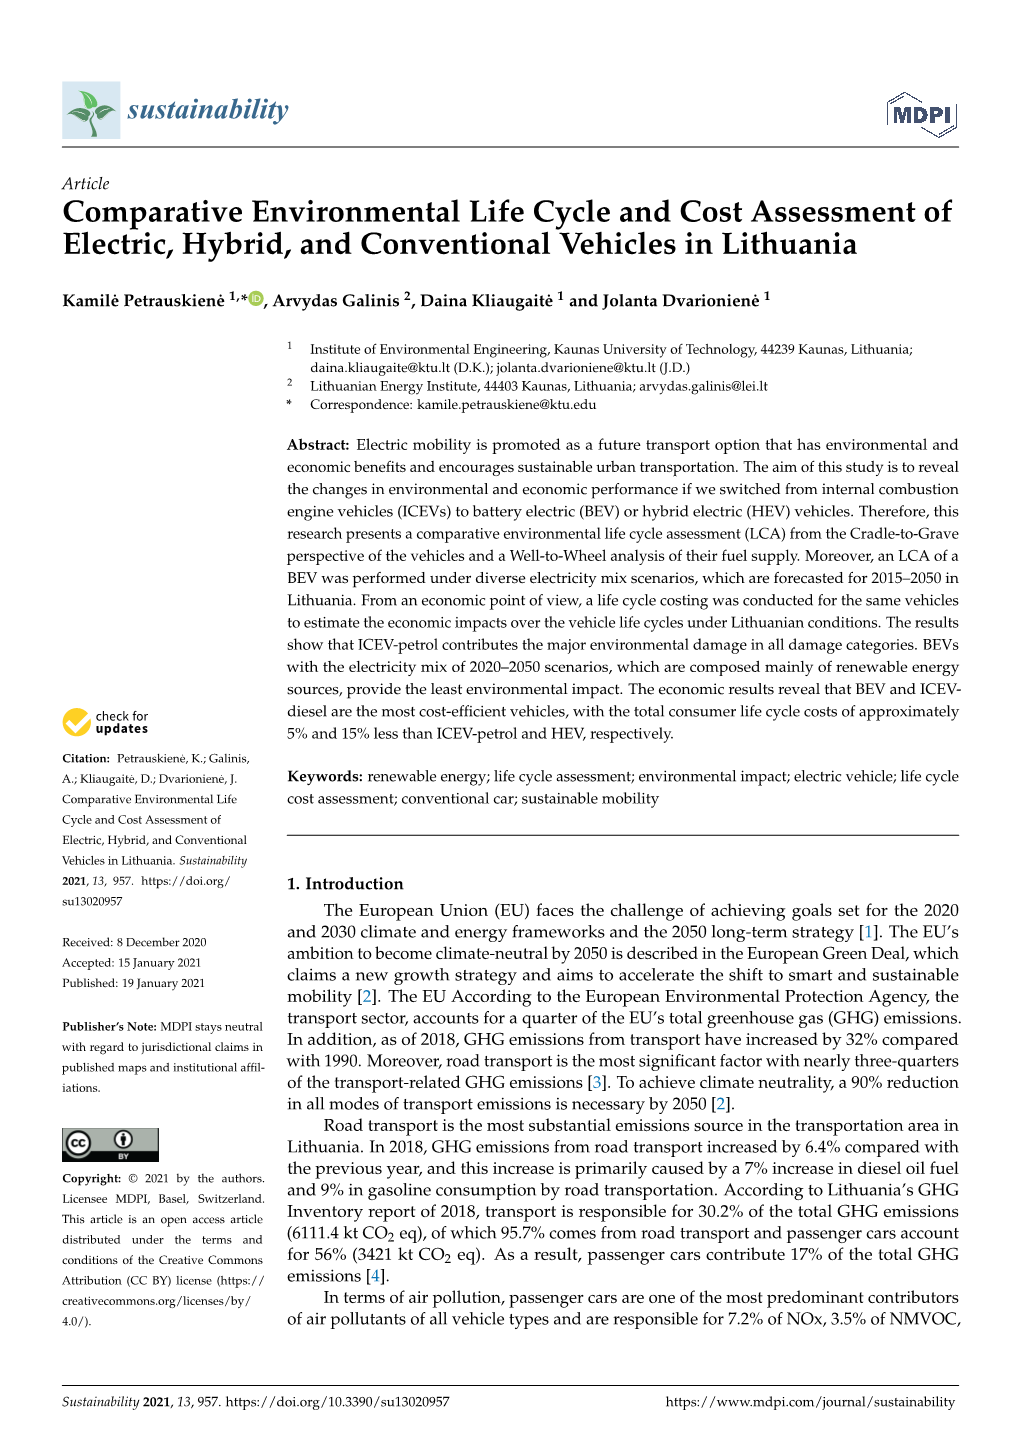 Comparative Environmental Life Cycle and Cost Assessment of Electric, Hybrid, and Conventional Vehicles in Lithuania